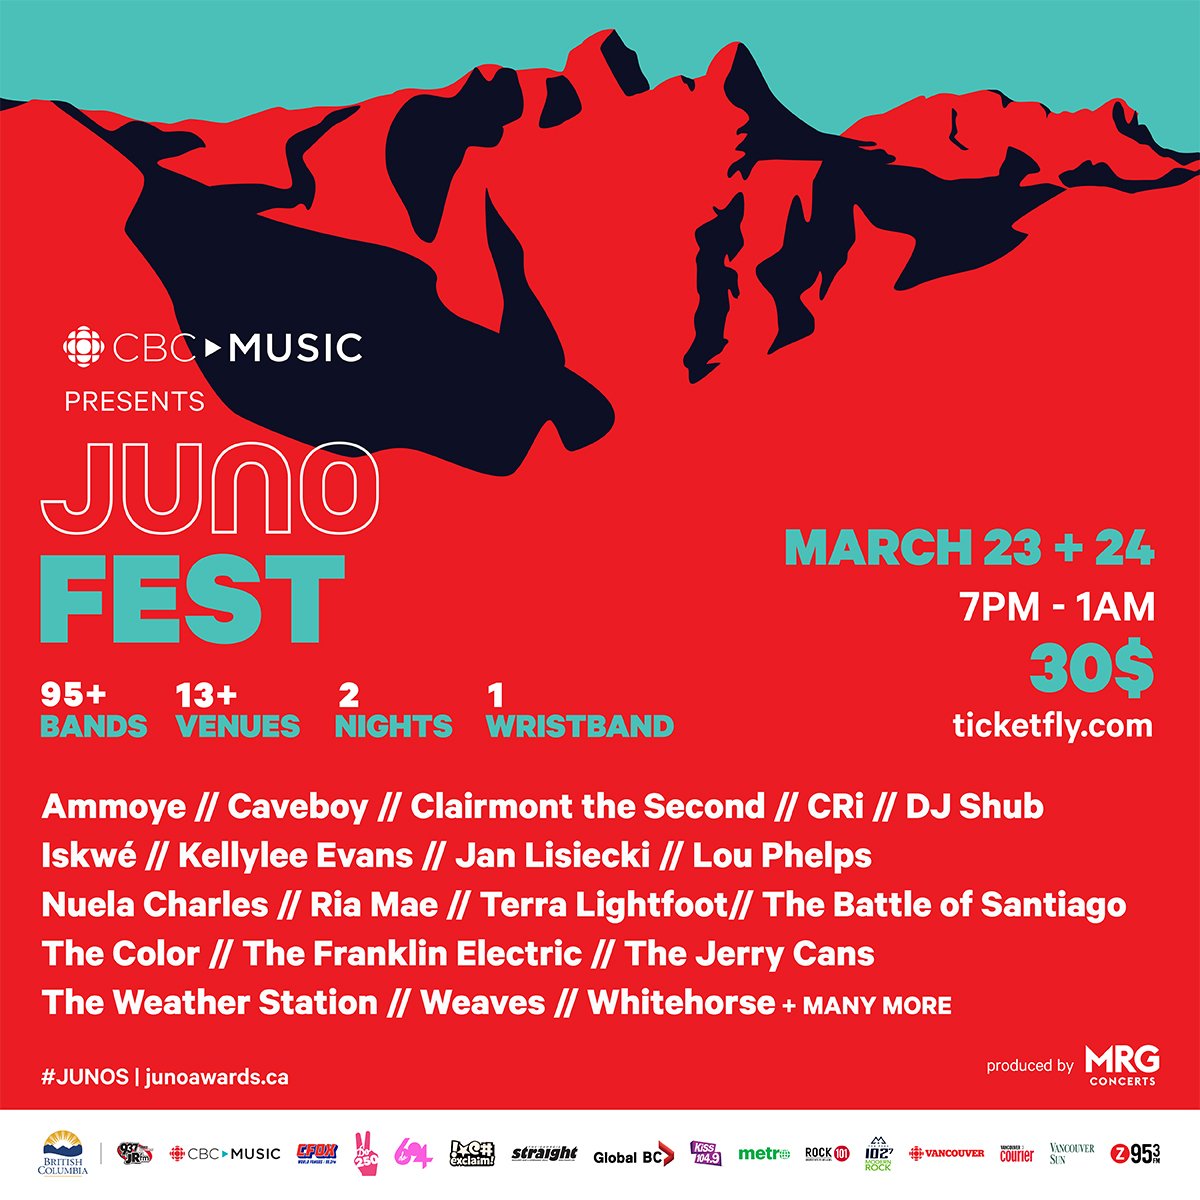 .@Junofest starts tonight in #Vancouver! Wristbands are on sale now! One wristband, 2 nights, 13+ venues, AND 95+ bands! Presented by @CBCMusic! 🎫: buff.ly/2HDDNlN ℹ️: buff.ly/2pfbenD 🎉: @JUNOfest / #JUNOFest